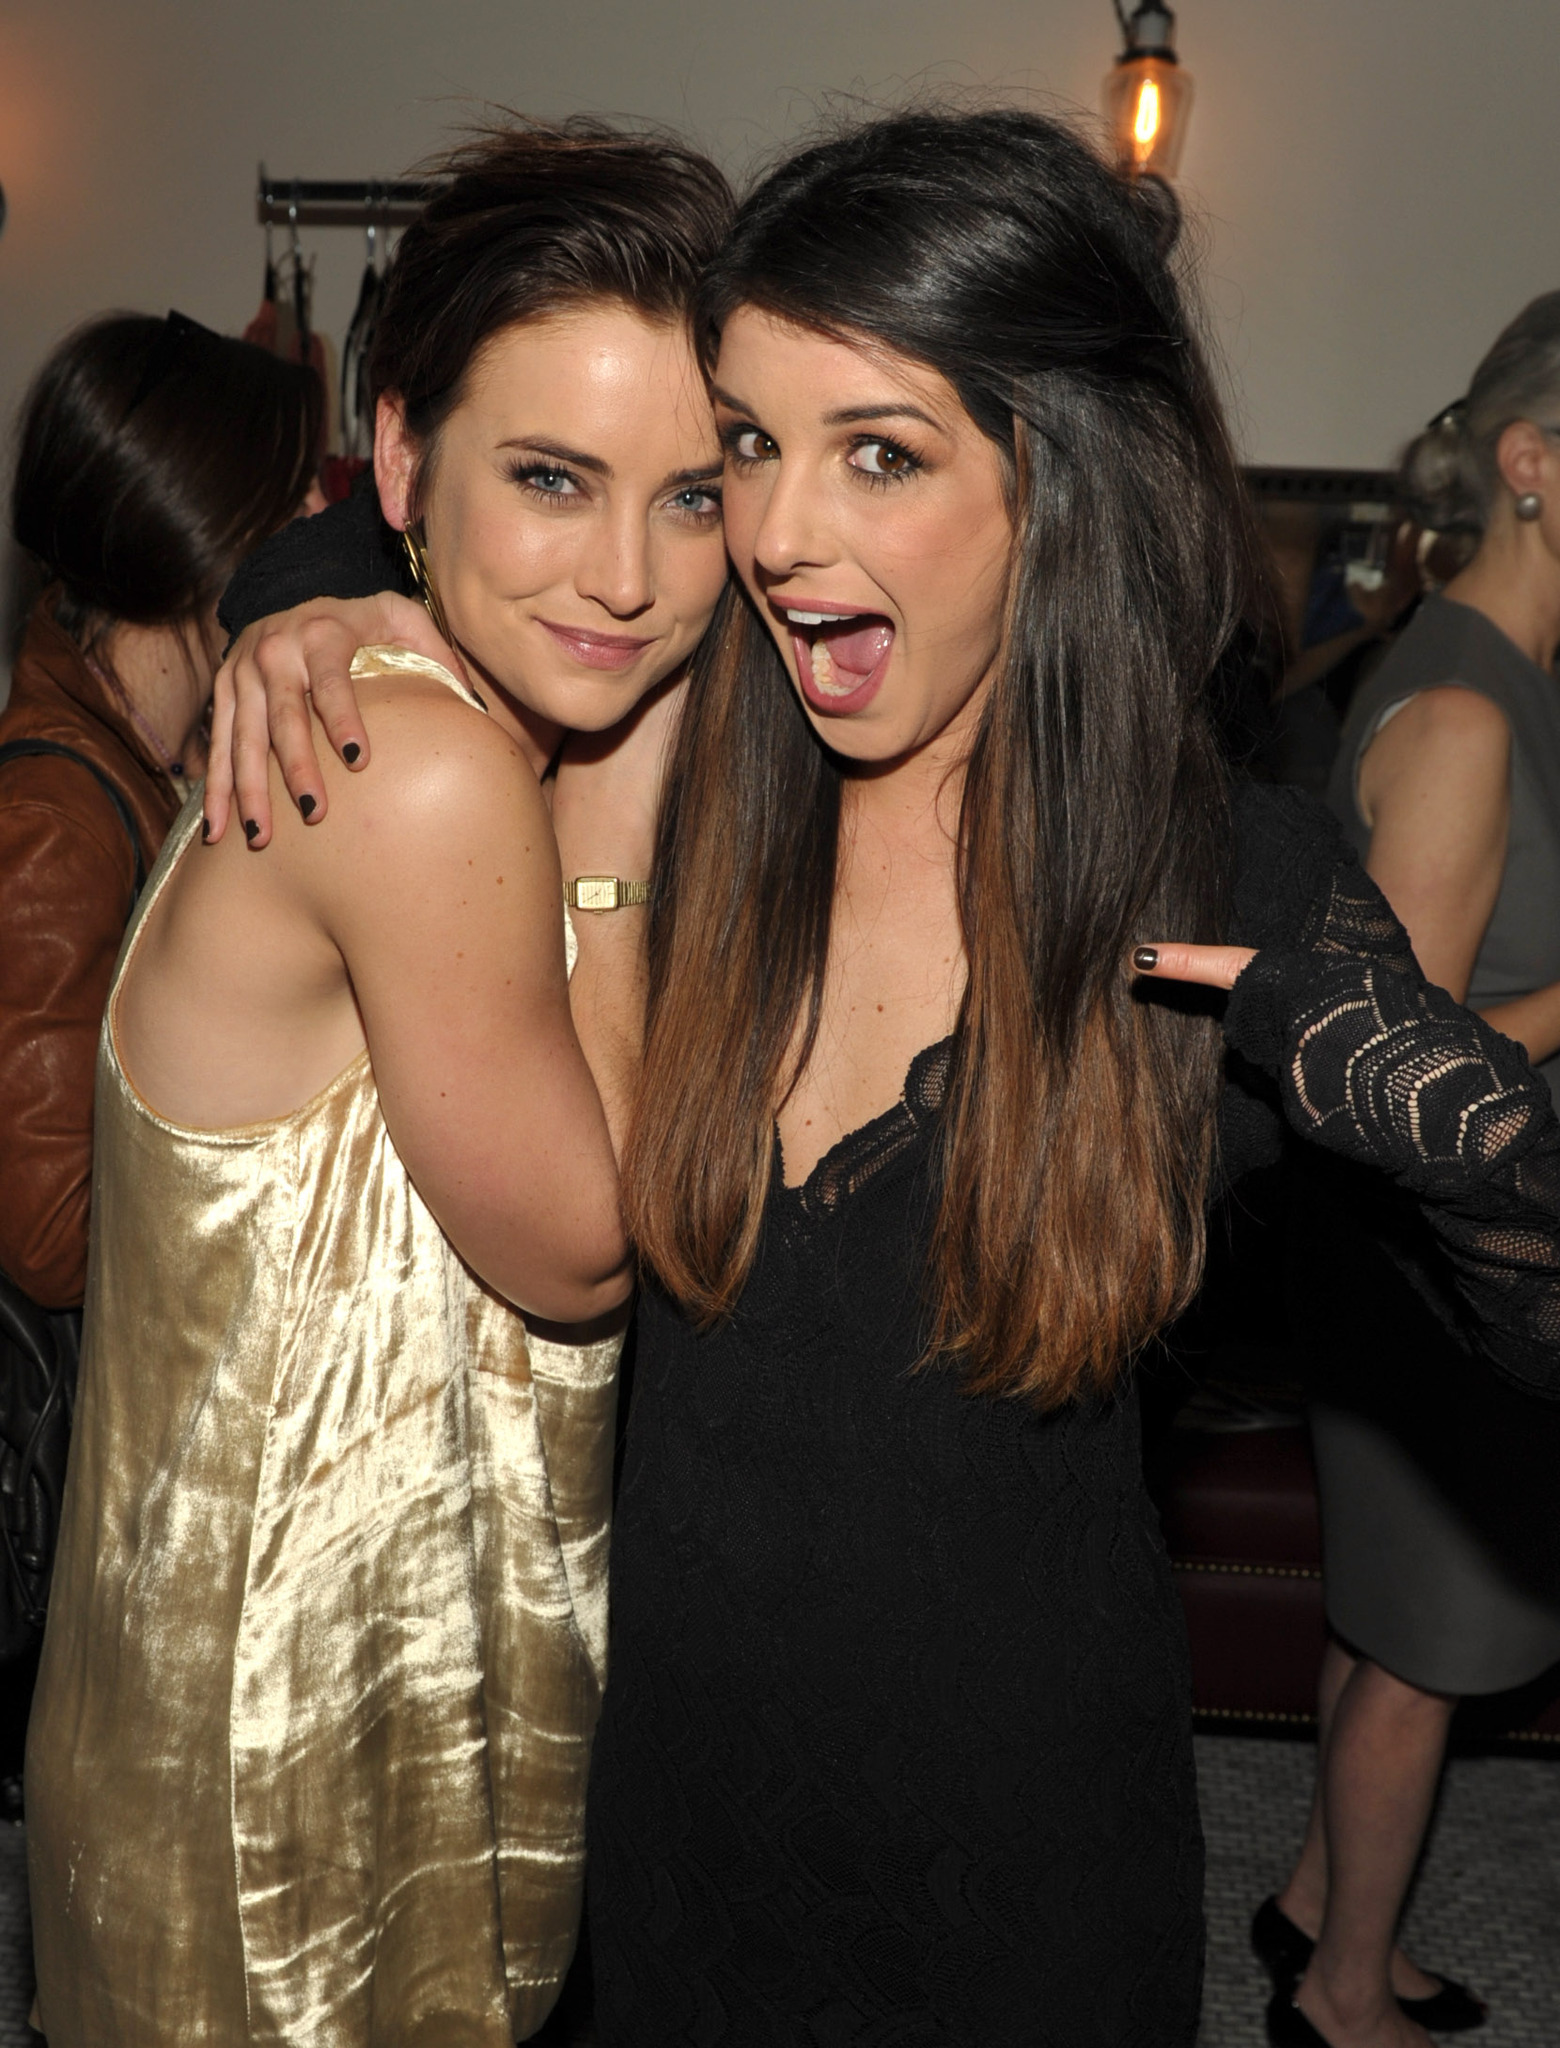 Shenae Grimes-Beech and Jessica Stroup